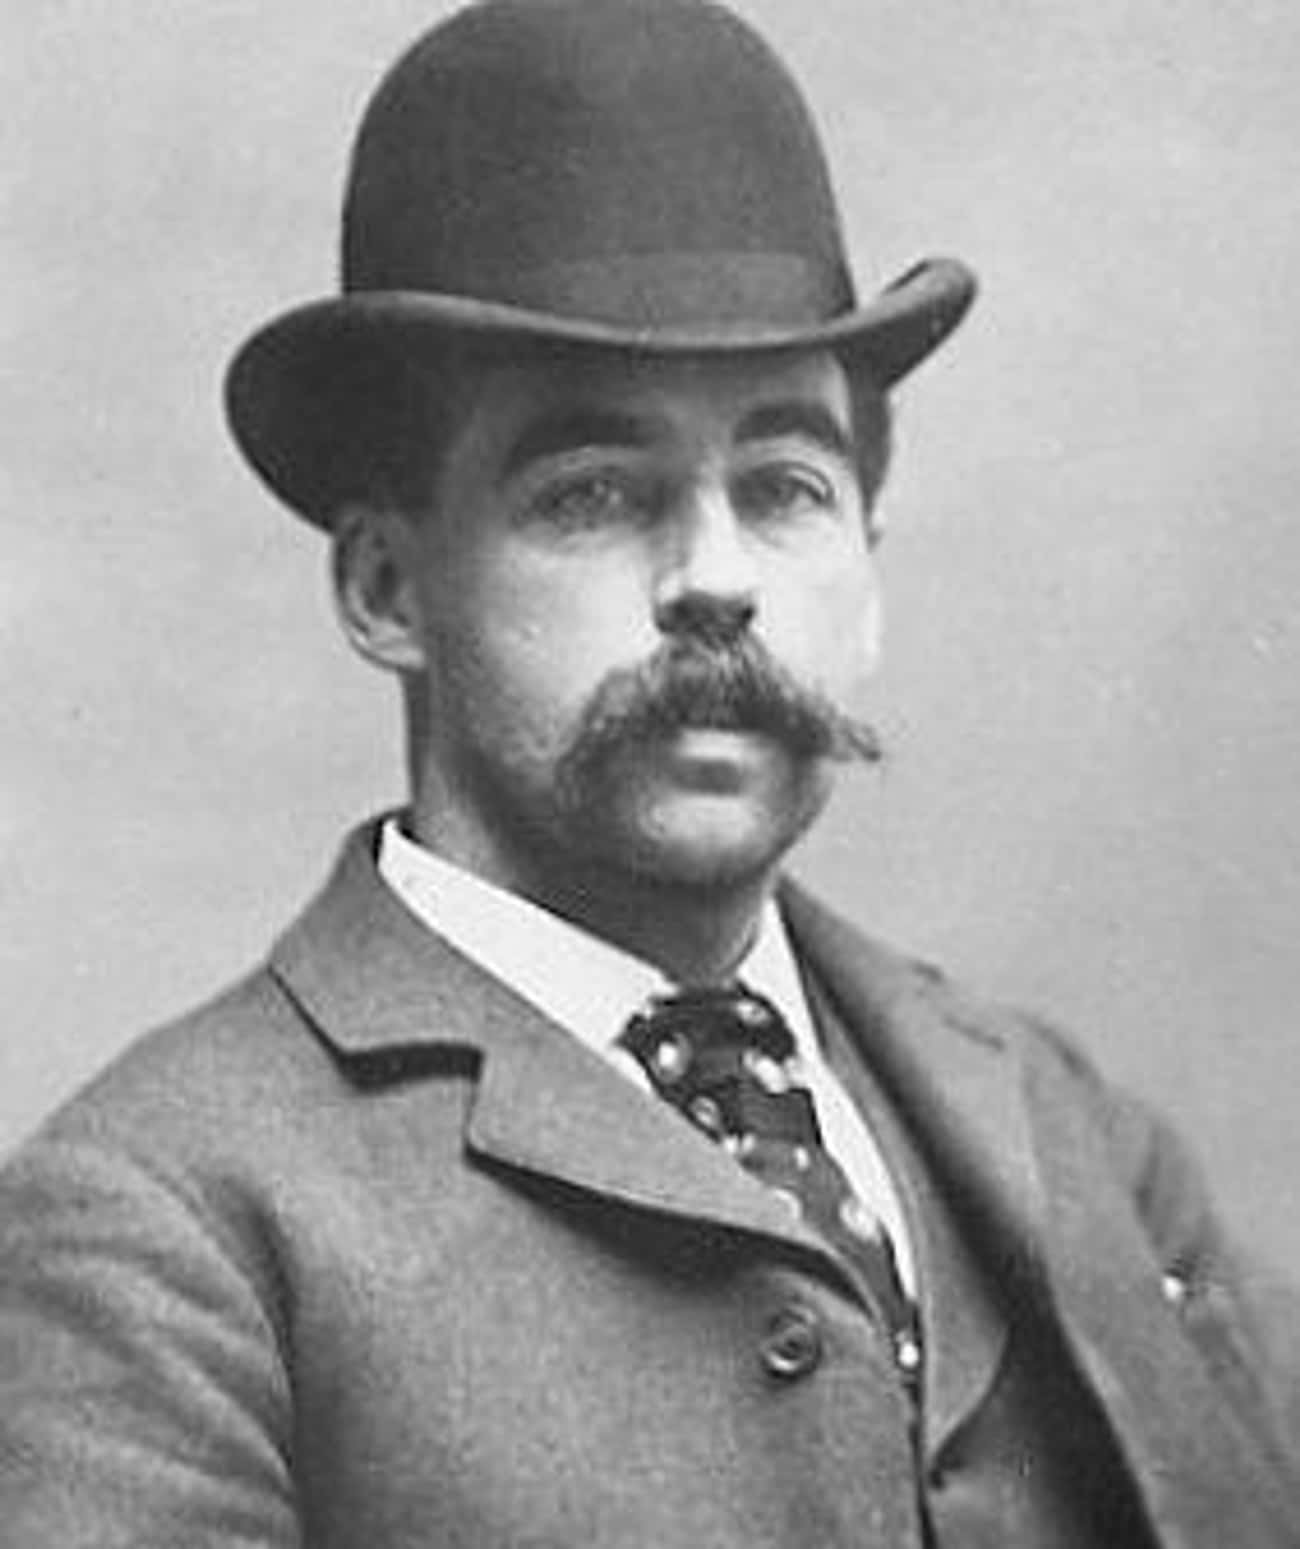 H.H. Holmes Built A Murder Castle With His Riches To Lure Victims